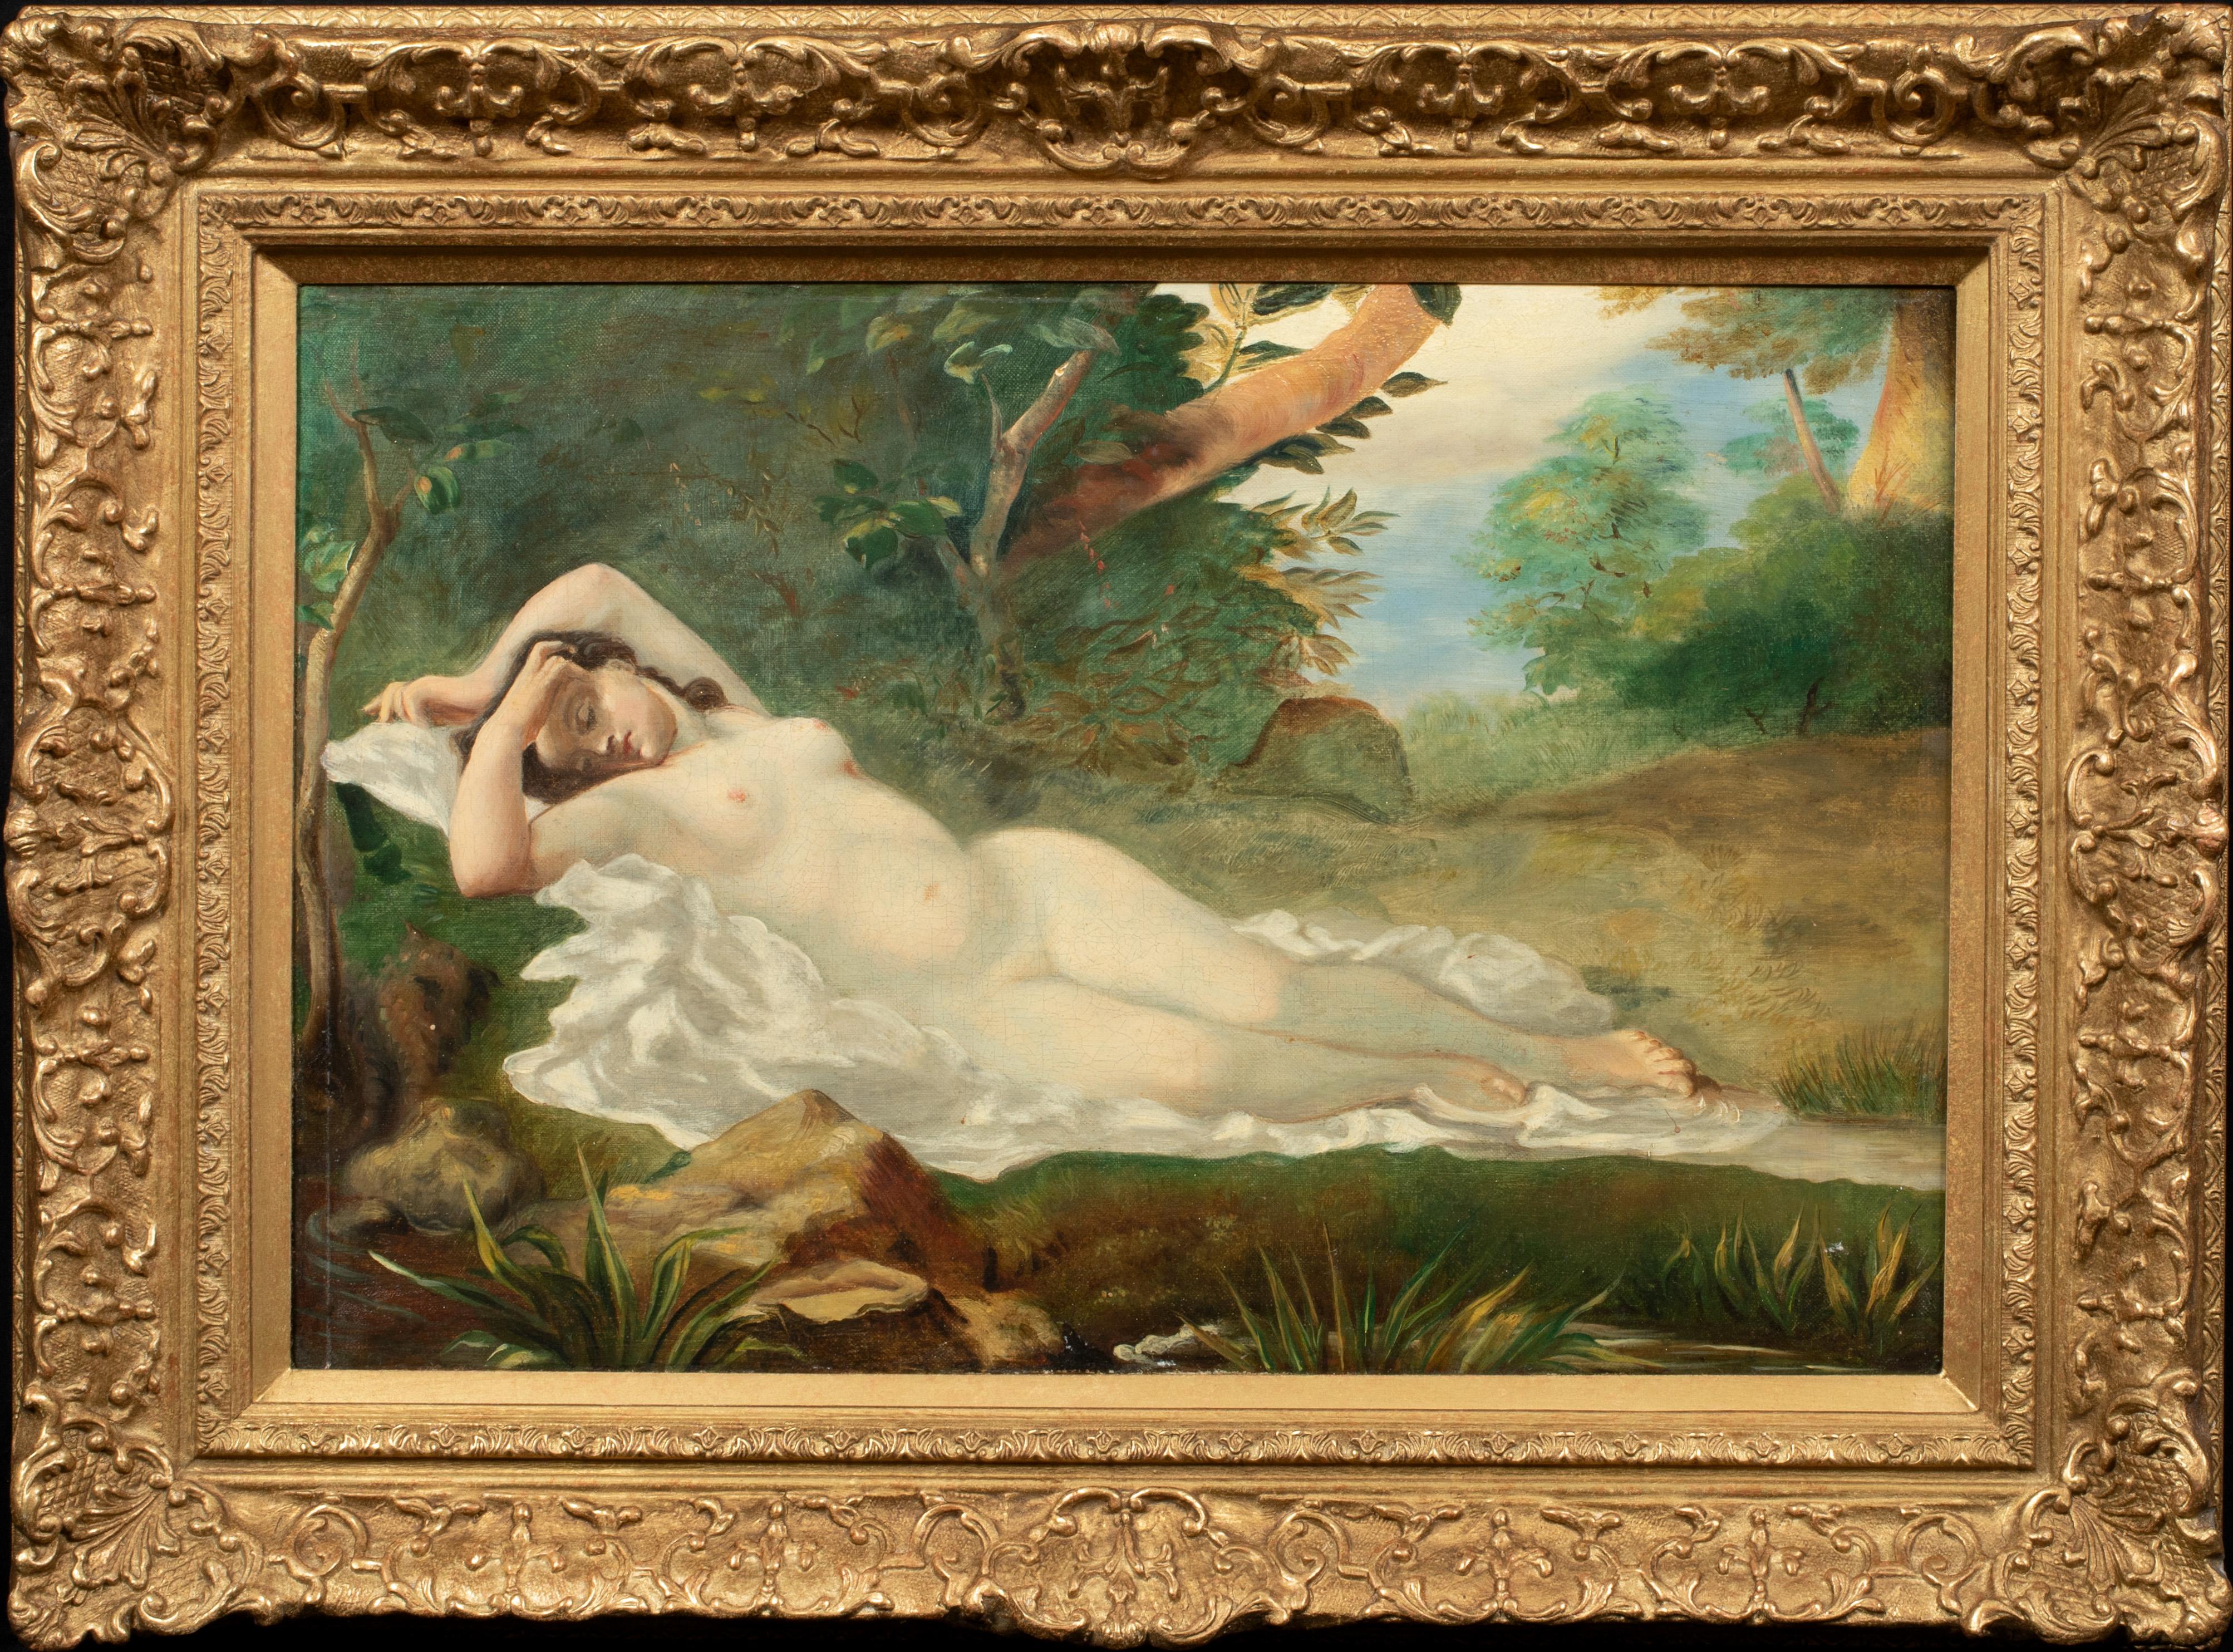 Unknown Portrait Painting - Nude Sleeping In The Forest, 19th century 